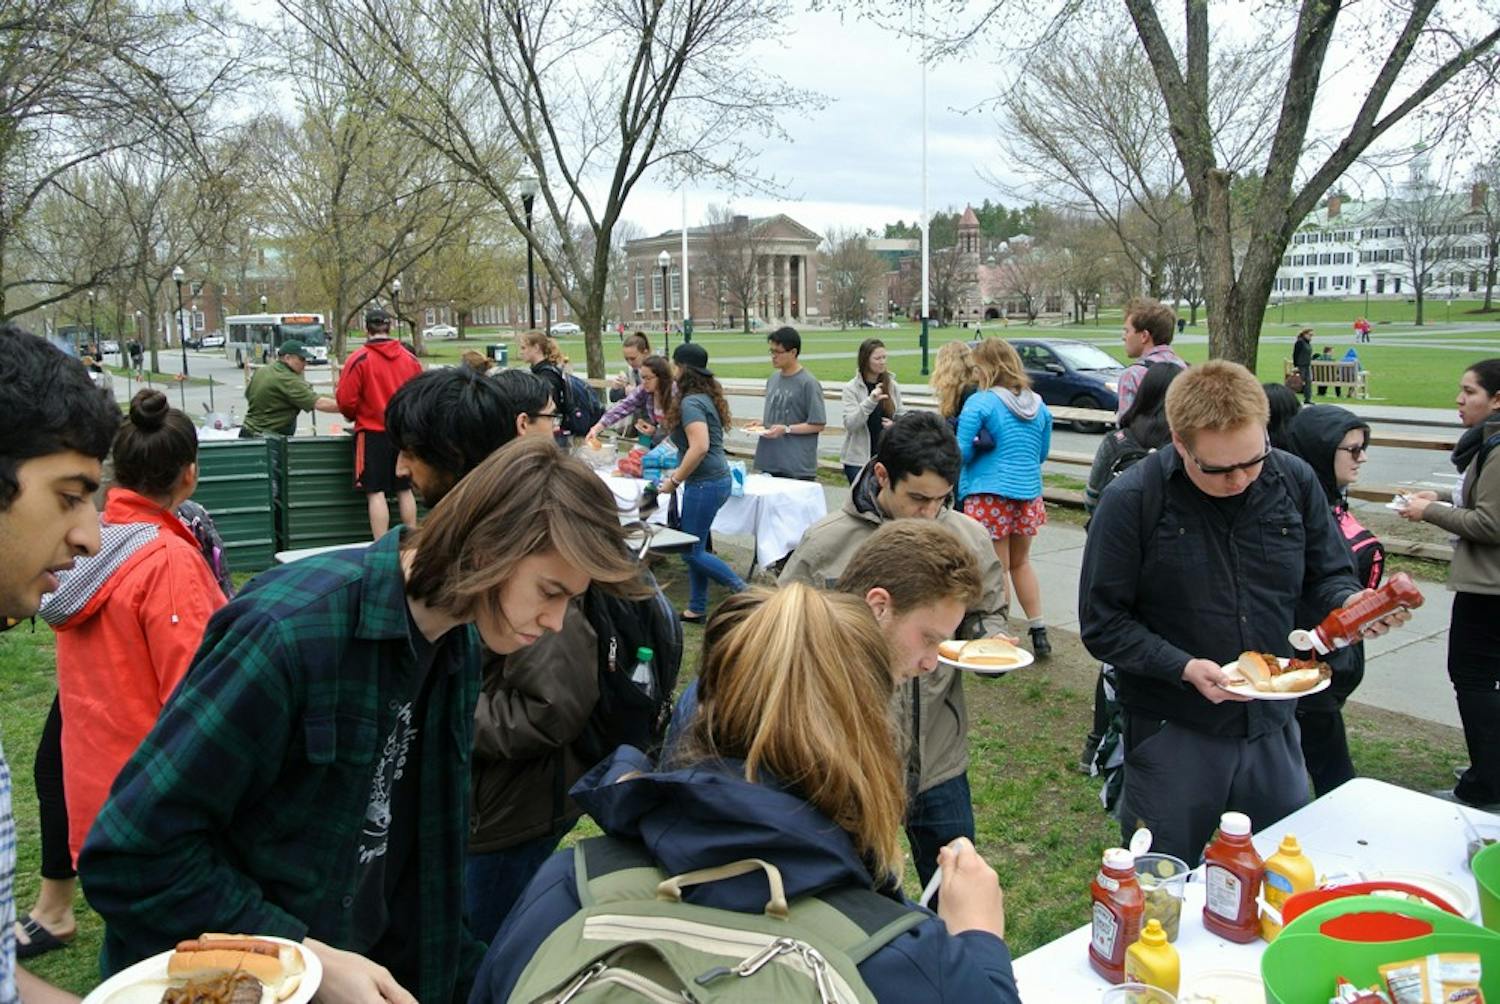 PRIDE hosted a barbeque in front of Collis as part of its programming this year.